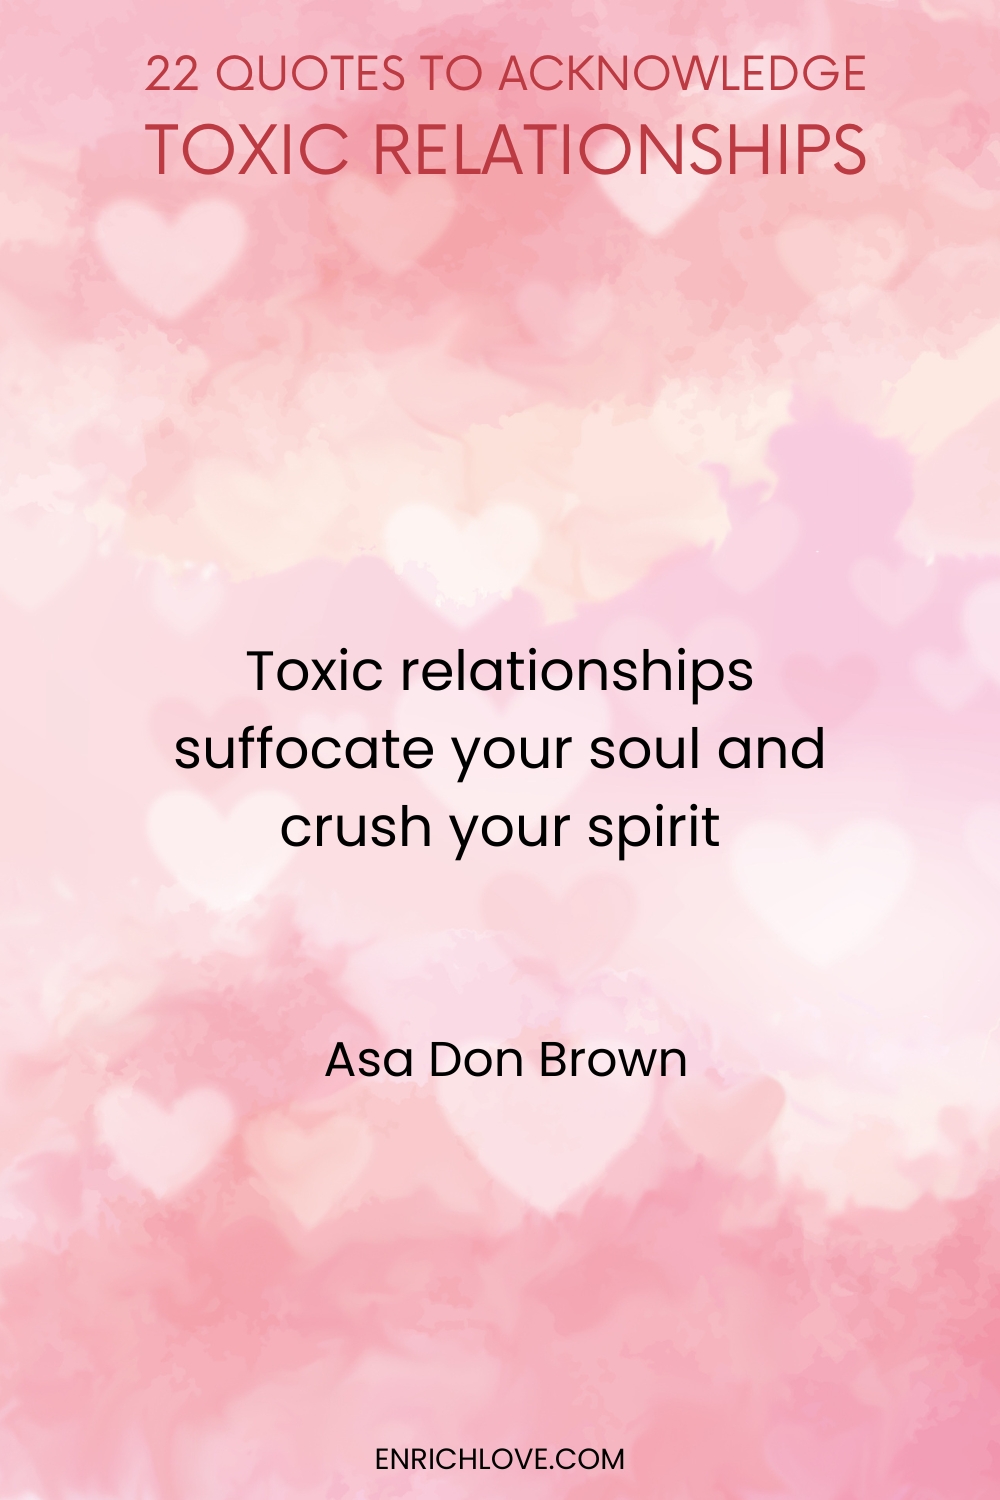 22 Quotes to Acknowledge Toxic Relationships -Toxic relationships suffocate your soul and crush your spirit by Asa Don Brown